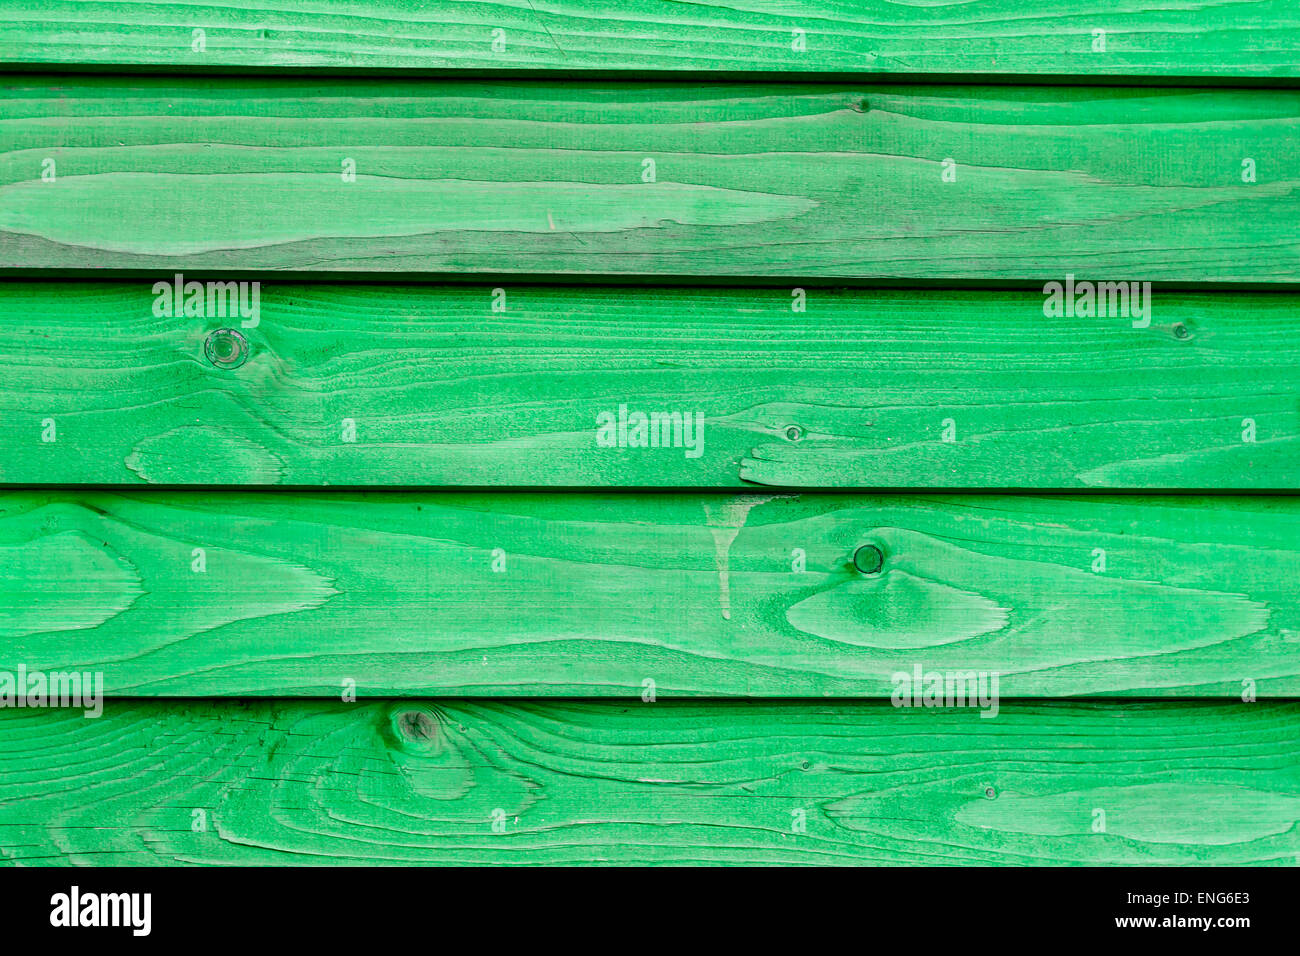 The green wood texture with natural patterns Stock Photo